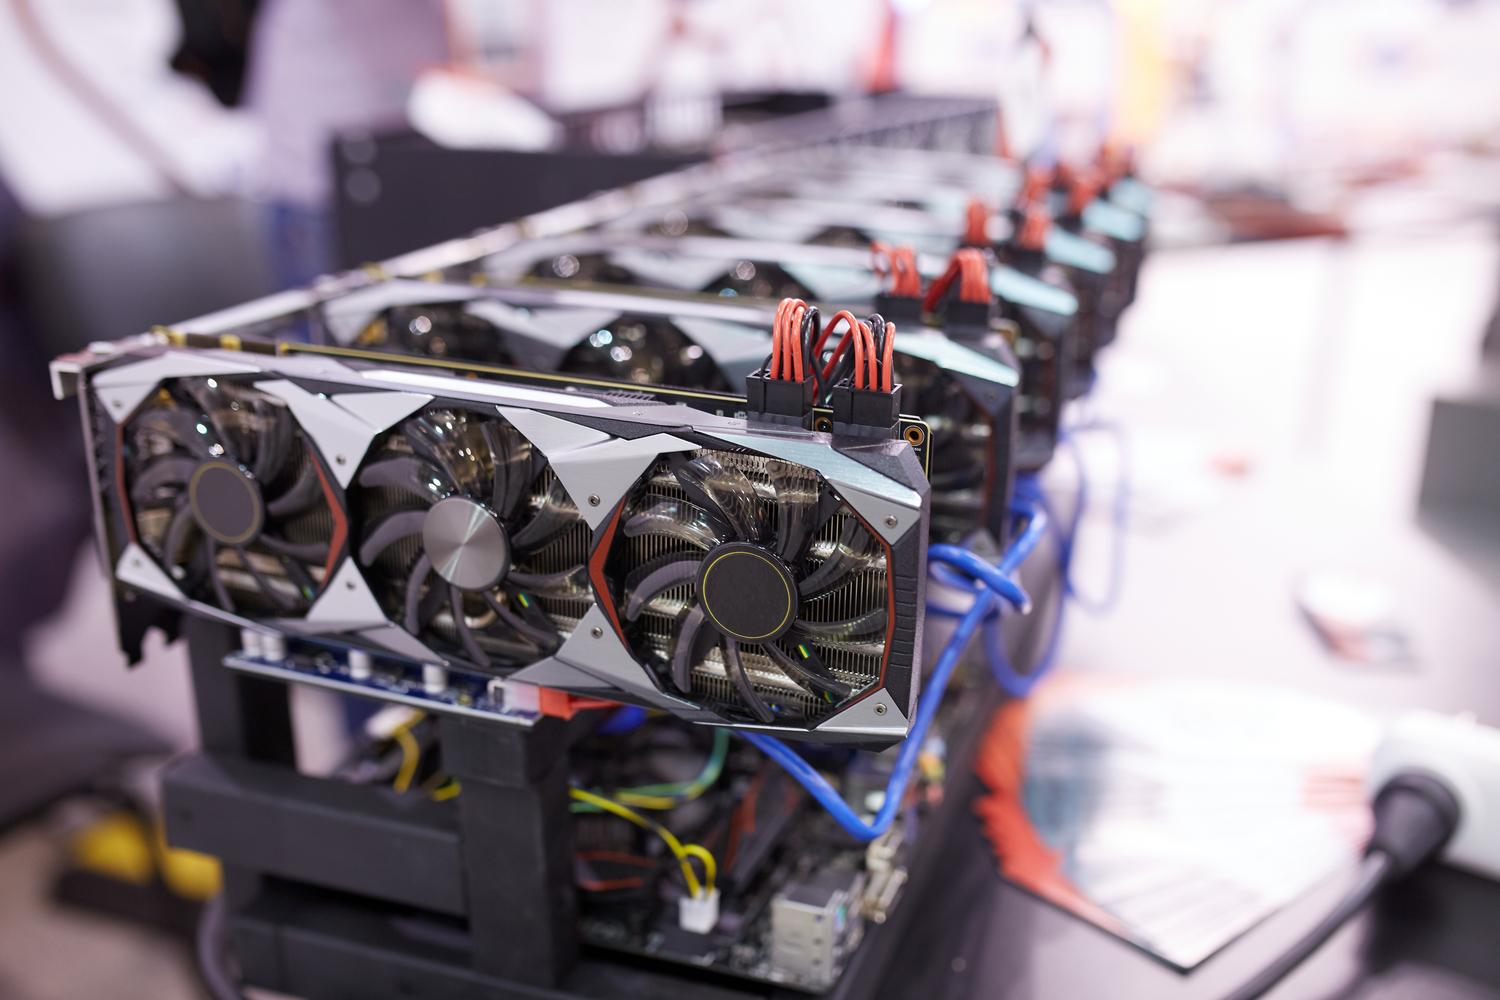 Marathon Indicators New $23M Contract with Bitmain for 10,500 Bitcoin Mining Rigs